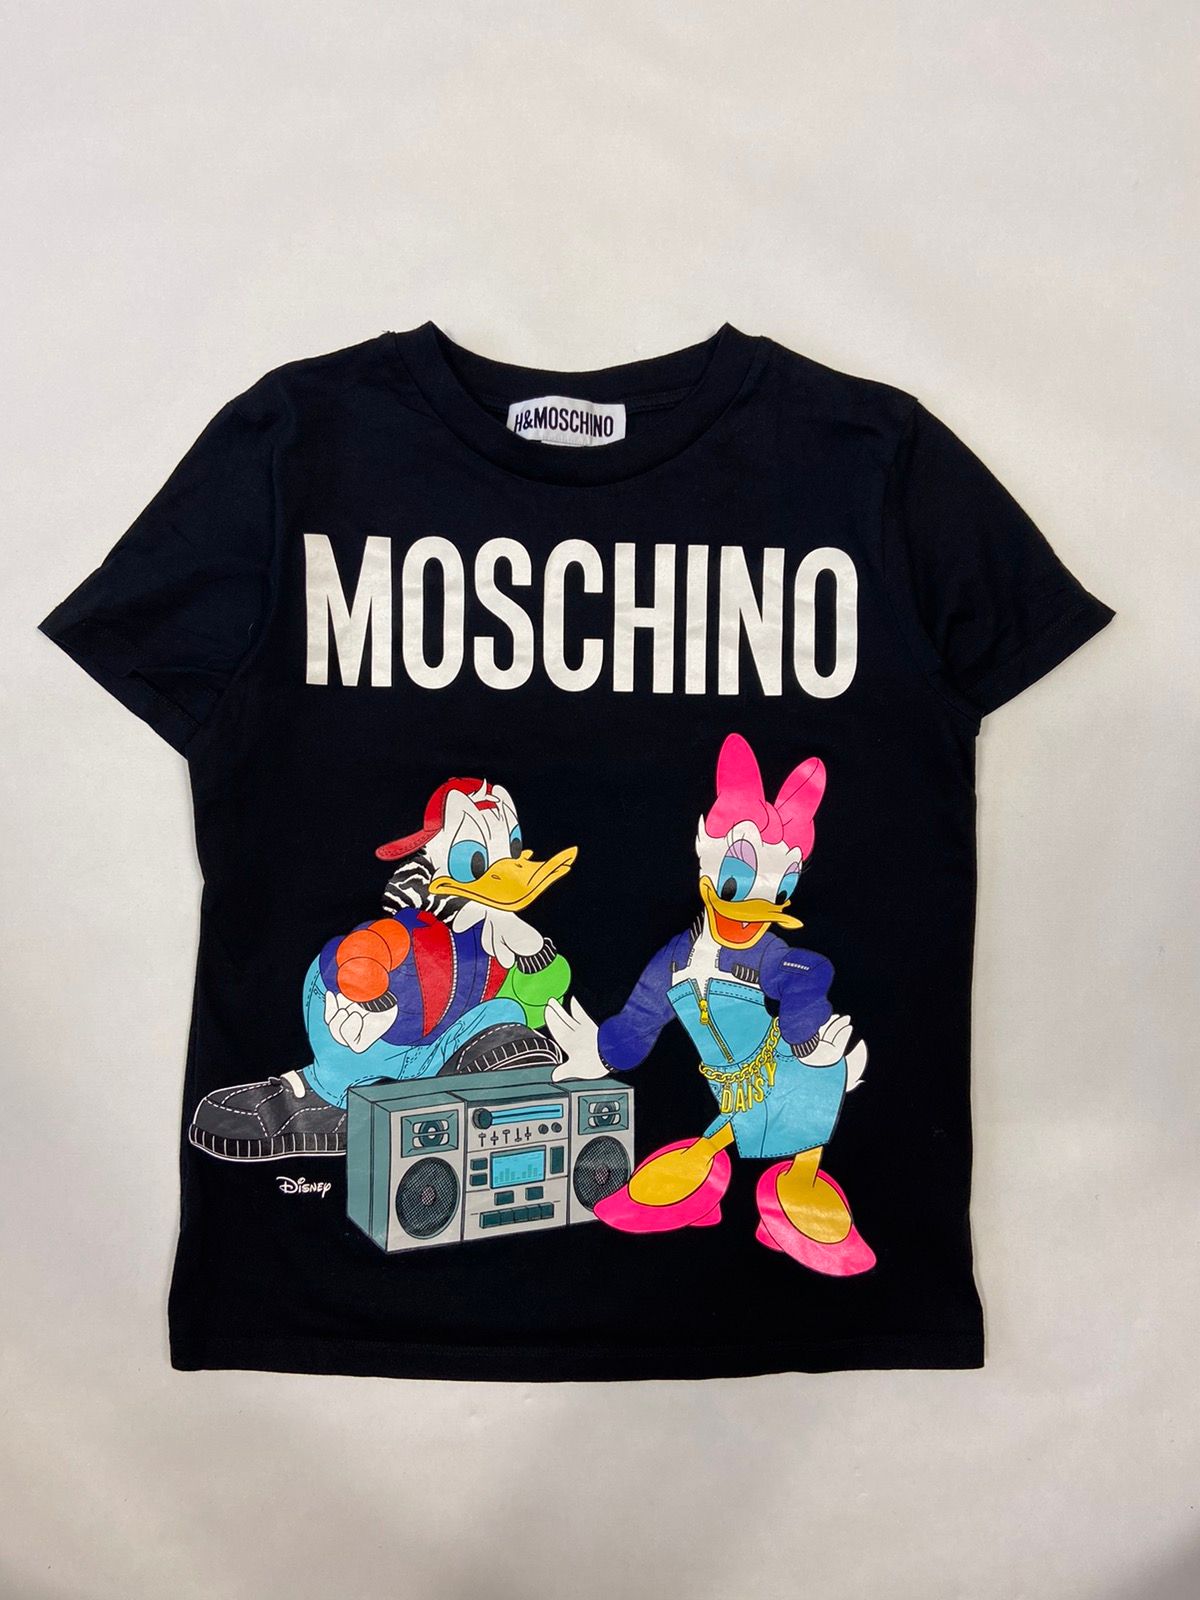 Moschino H&M Moschino Disney Mickey Mouse tee | Grailed